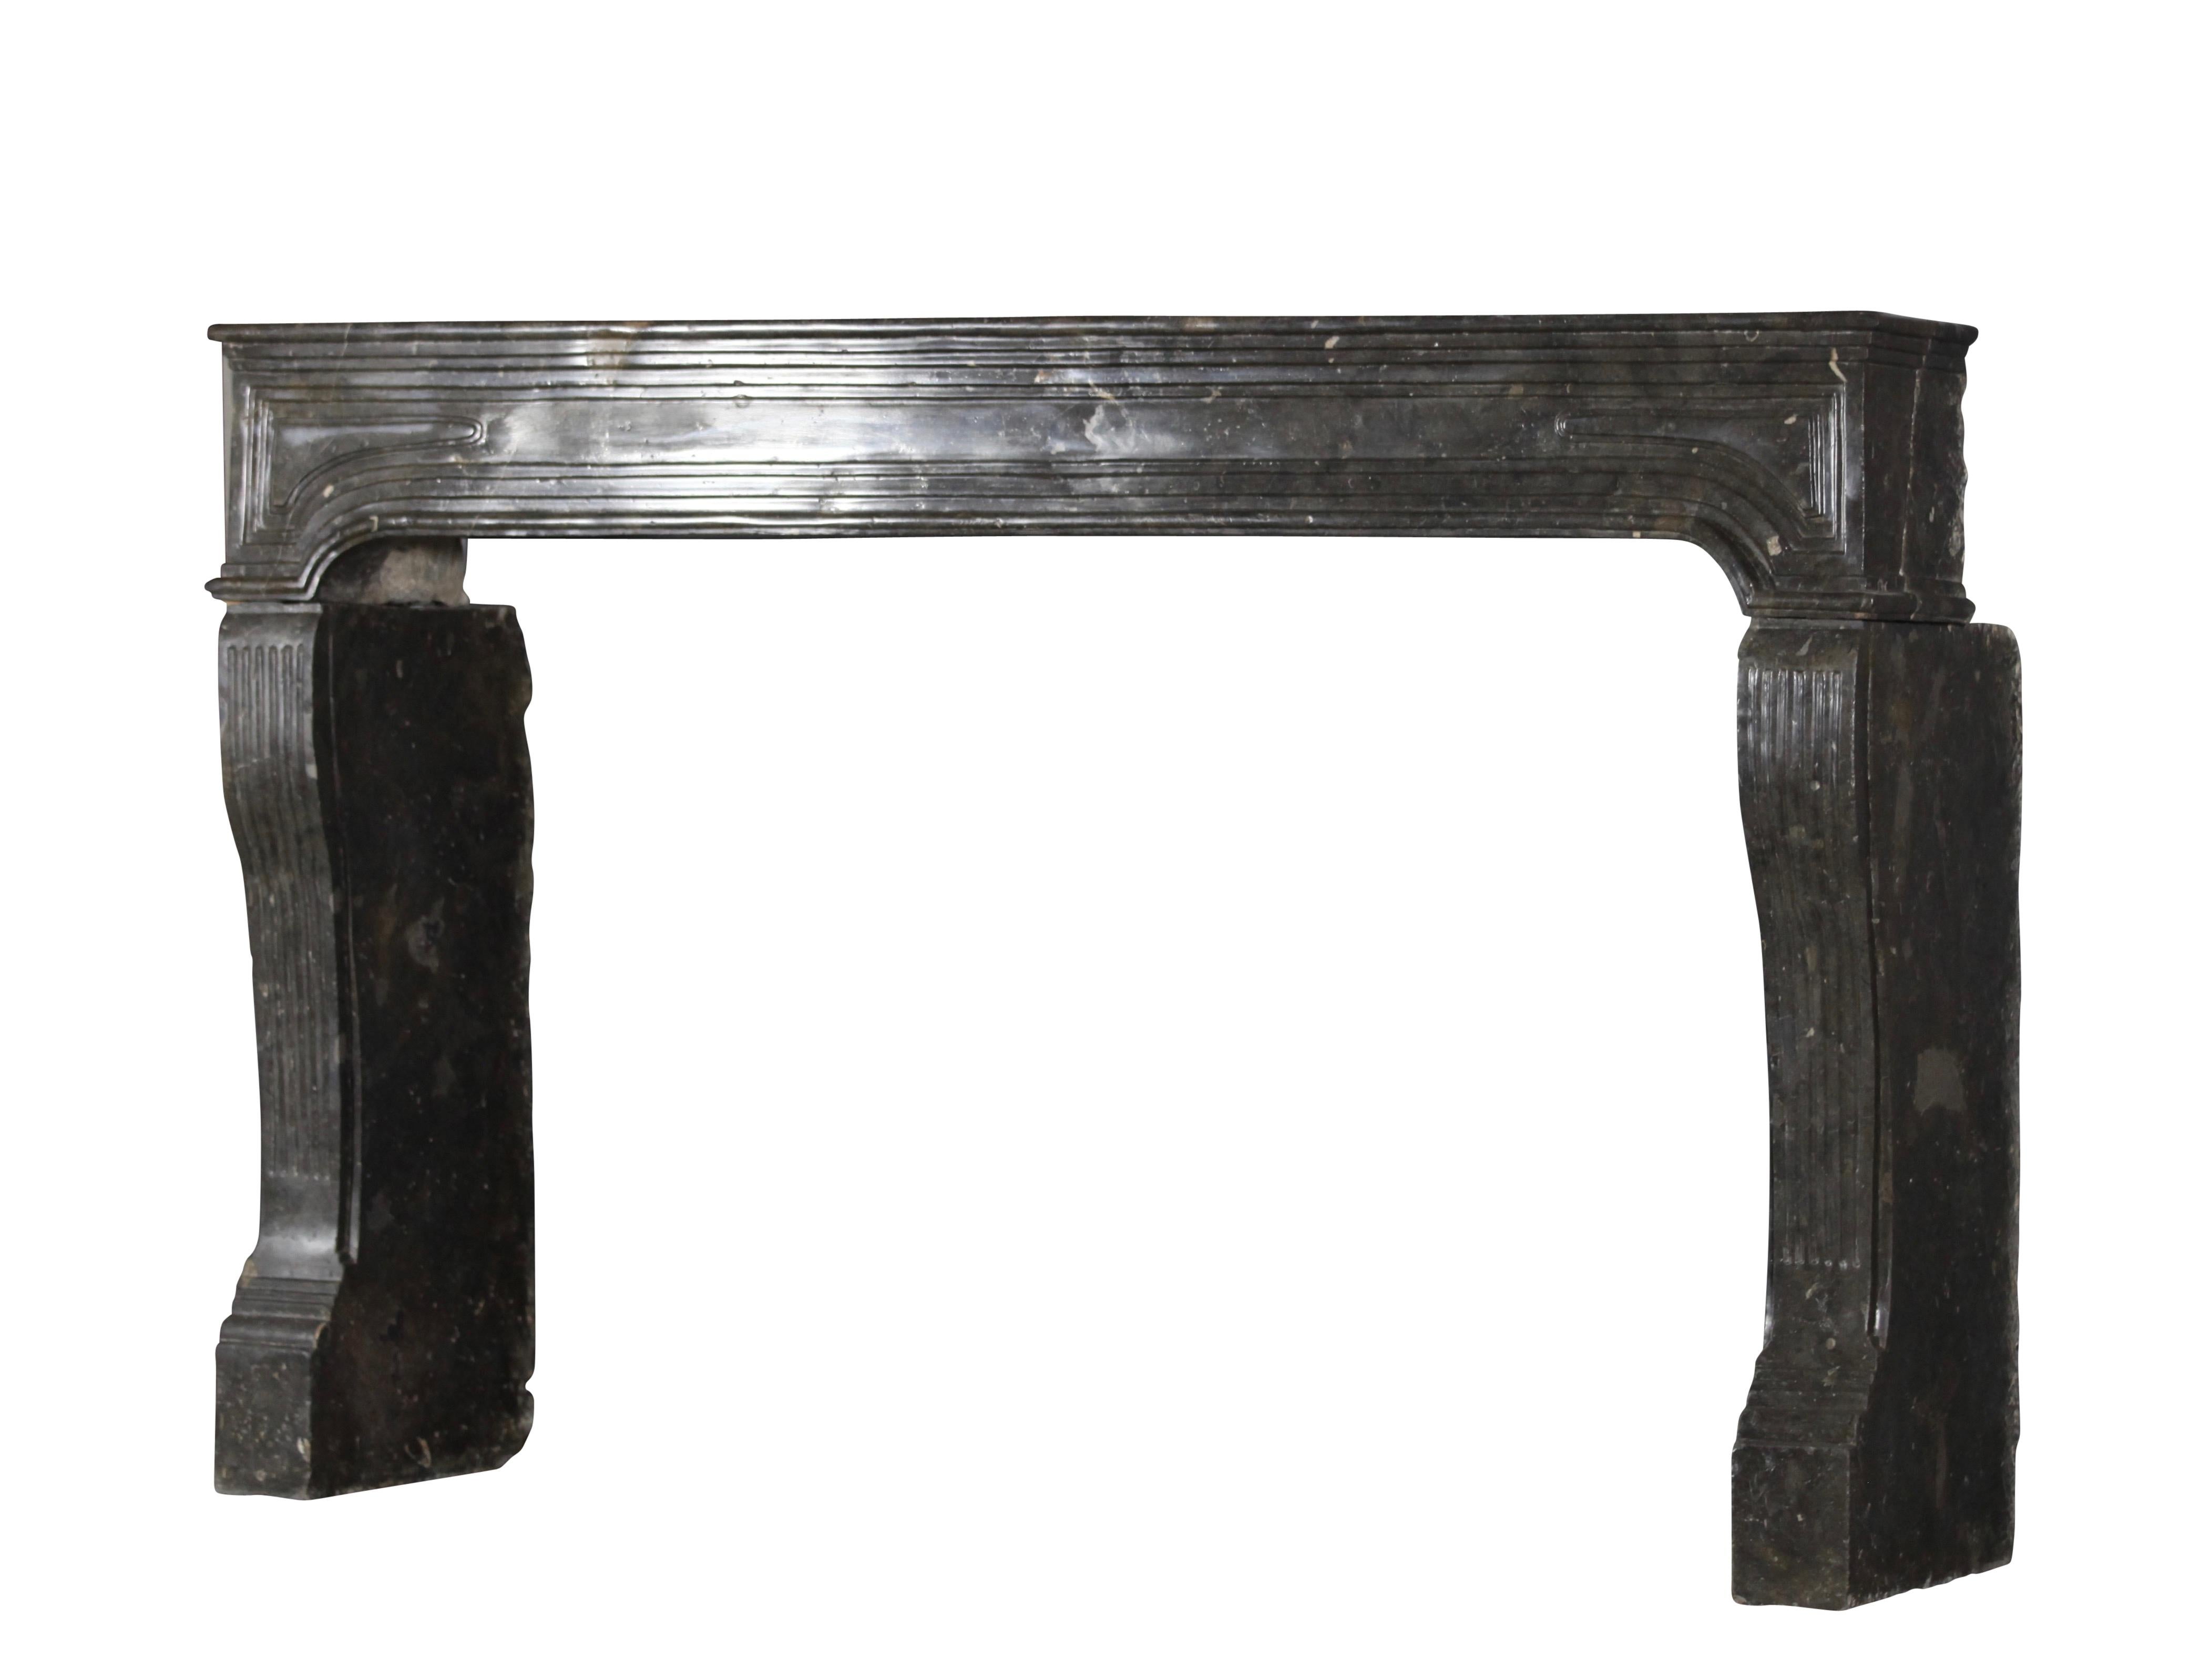 This original Italian antique fireplace surround in fossil stone is one of a kind. Unique proportions. See the images for the details of the carving. A real museum piece that works both in classic contemporary interiors with high end modern period